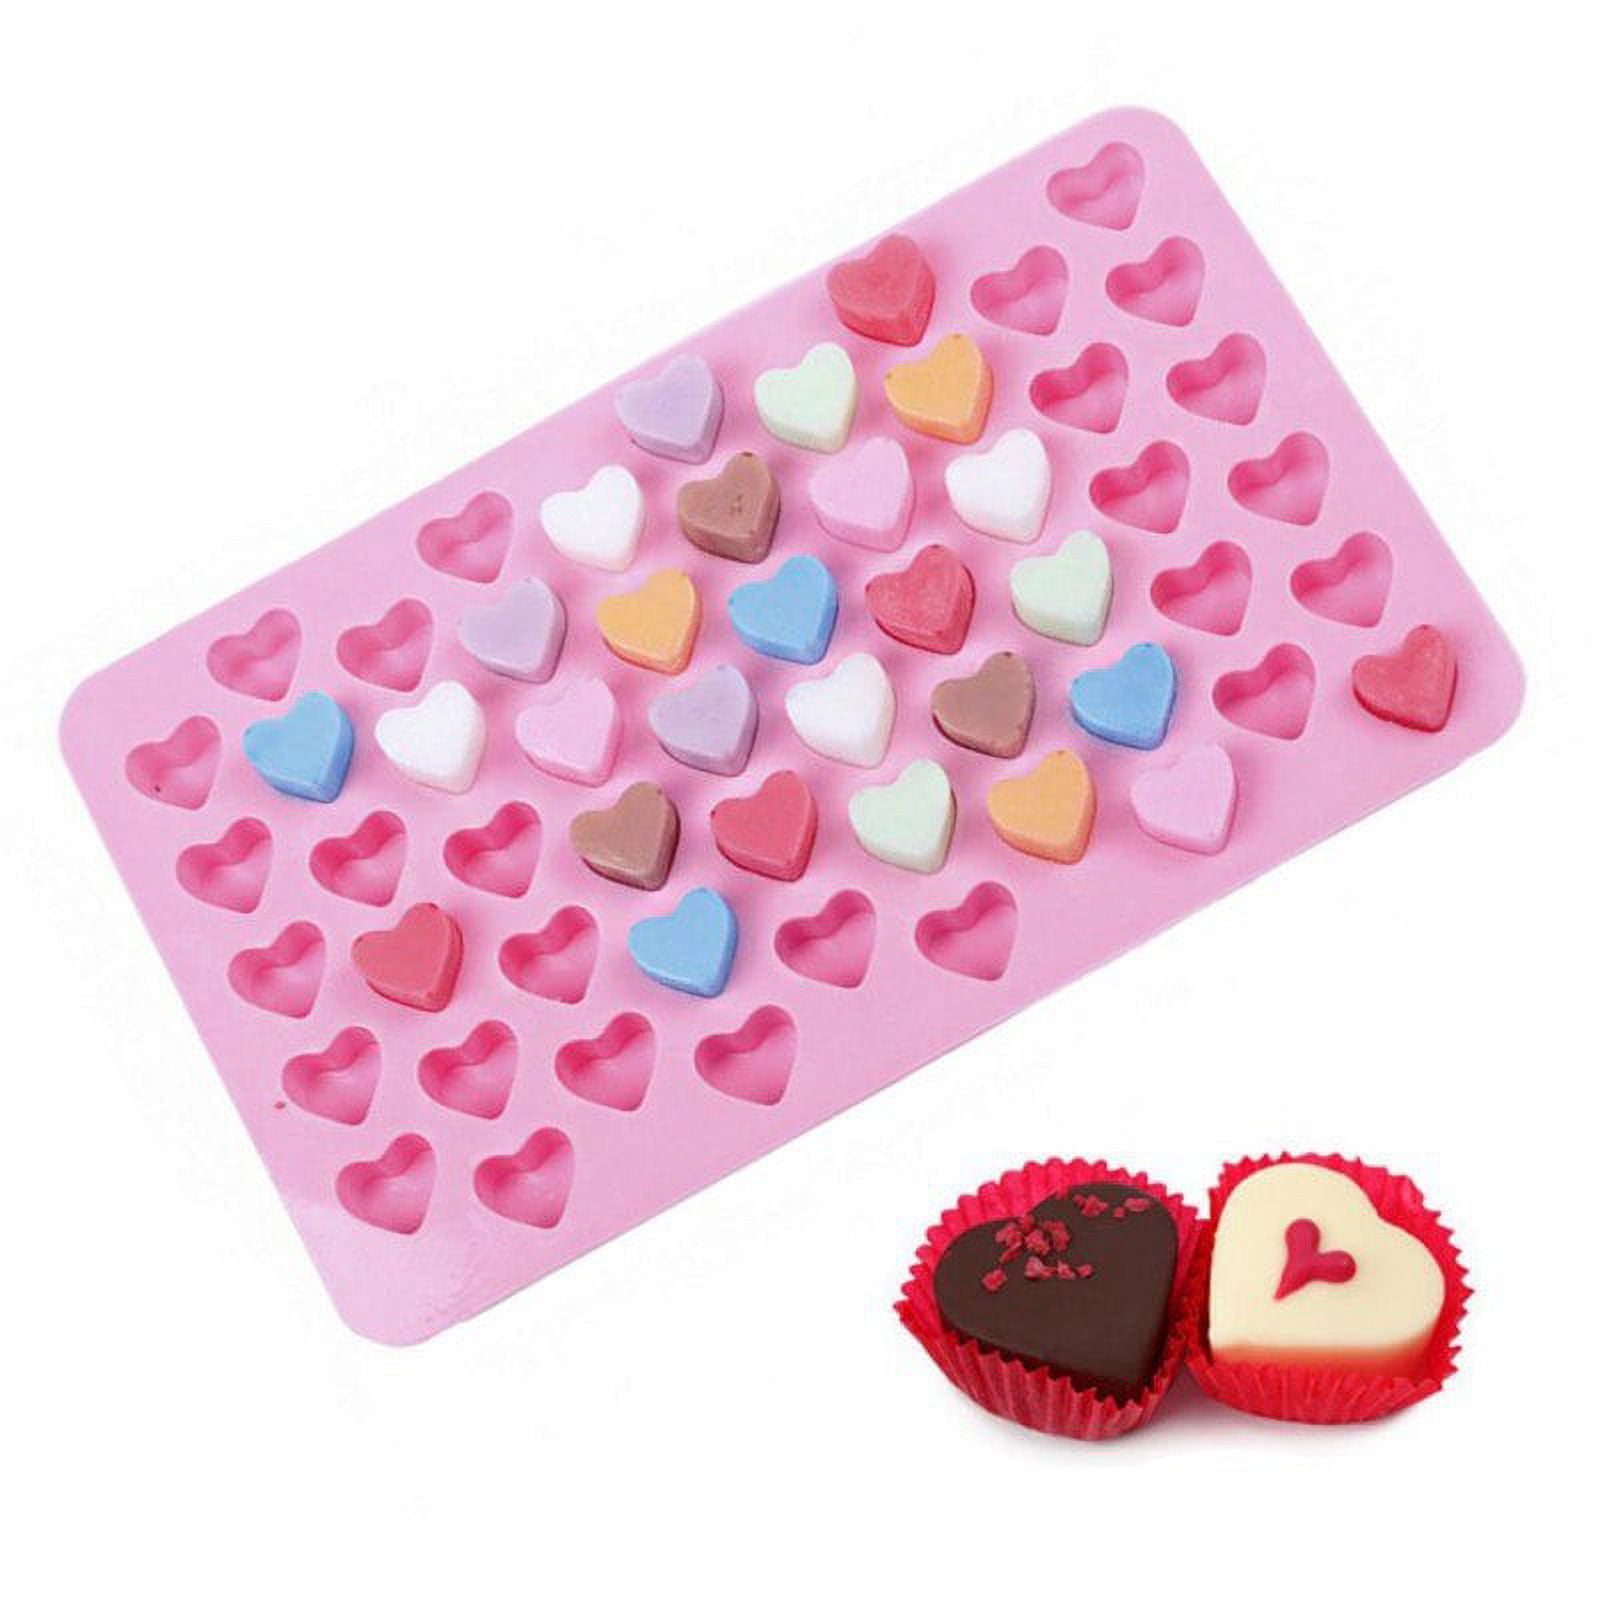 Mini Heart Mold Silicone Ice Cube Tray DIY Chocolate Fondant Mould 3D  Pastry Jelly Cookies Baking Cake Decoration Tools Kitchen